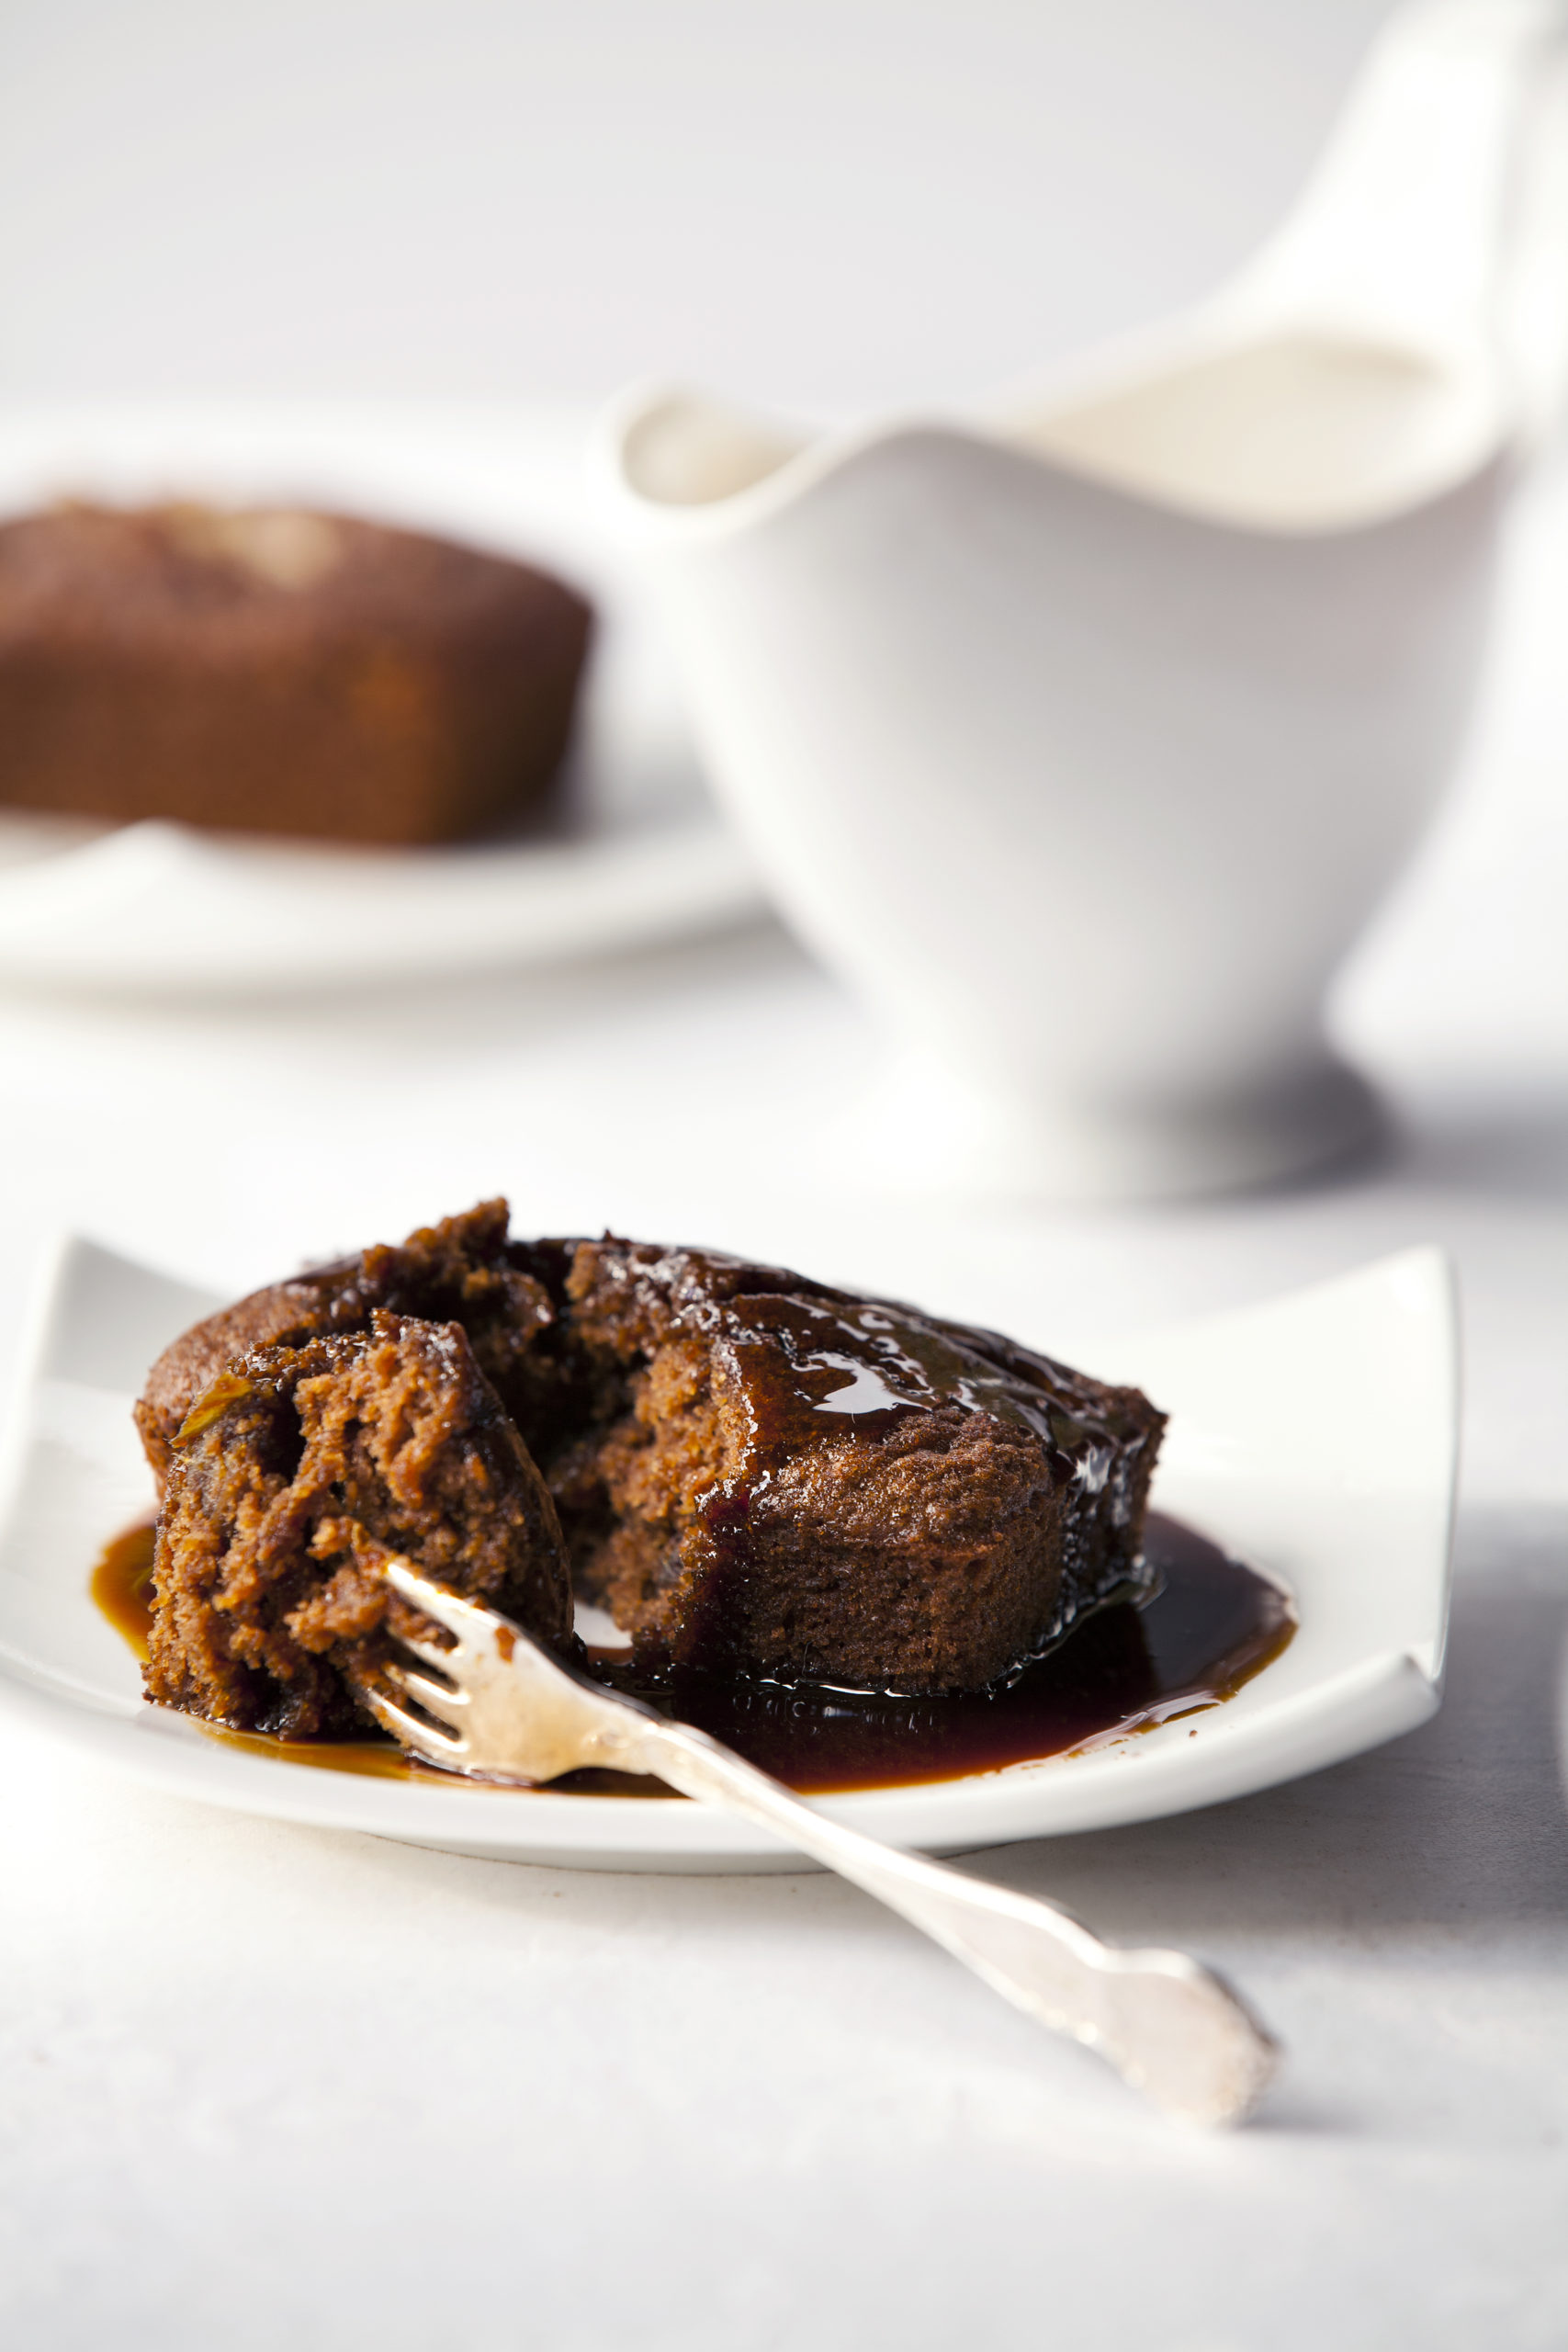 Ginger Date Puddings with Salted Caramel Sauce